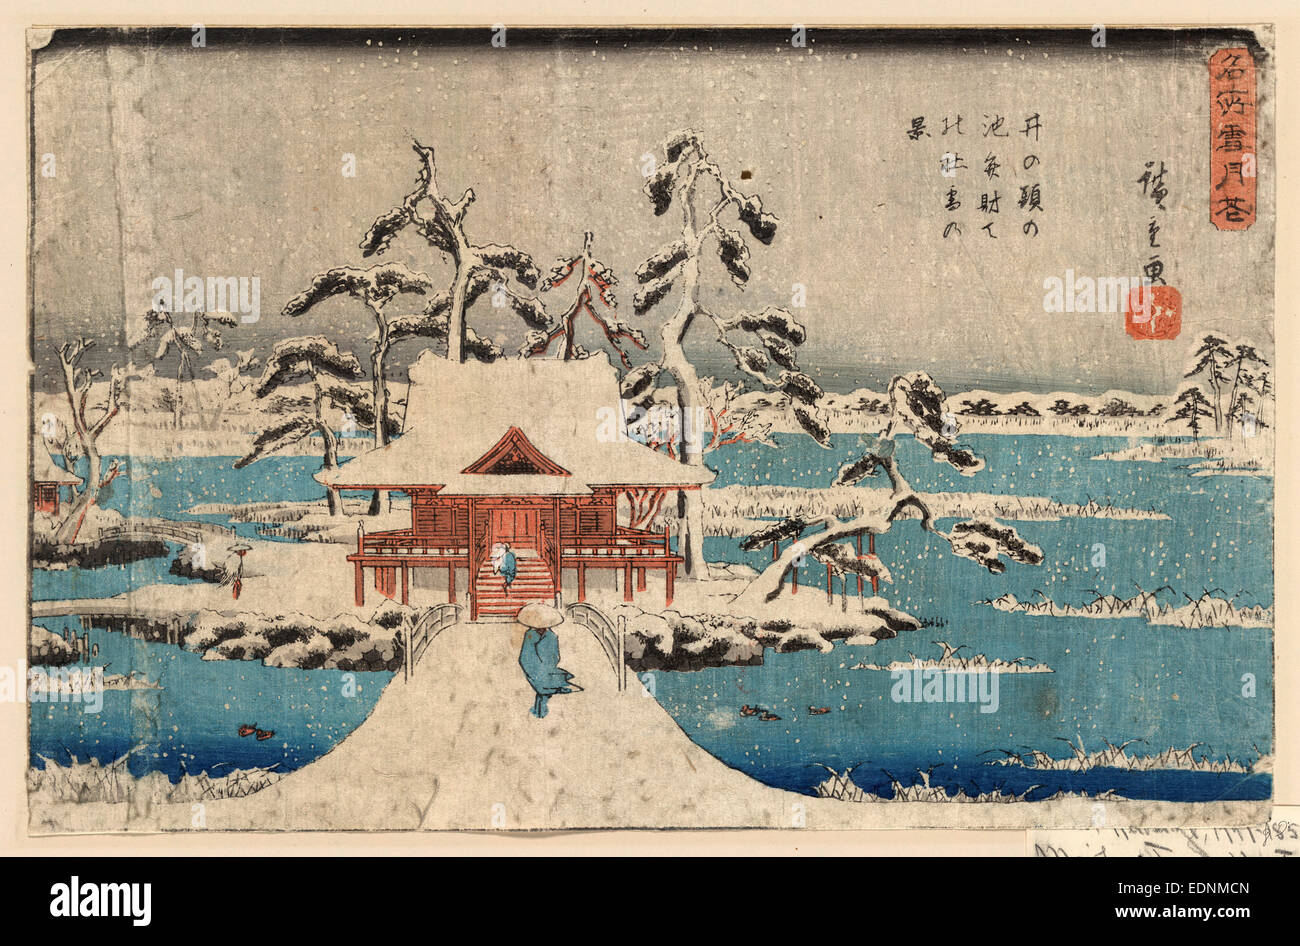 Inokashira no ike benzaiten no yashiro, Snow scene of Benzaiten Shrine in Inokashira pond., Ando, Hiroshige, 1797-1858, artist, [between 1838 and 1844], 1 print : woodcut, color ; 22.1 x 34.2 cm., Print shows two people crossing a bridge to a building on a small island during a winter snowstorm. Stock Photo